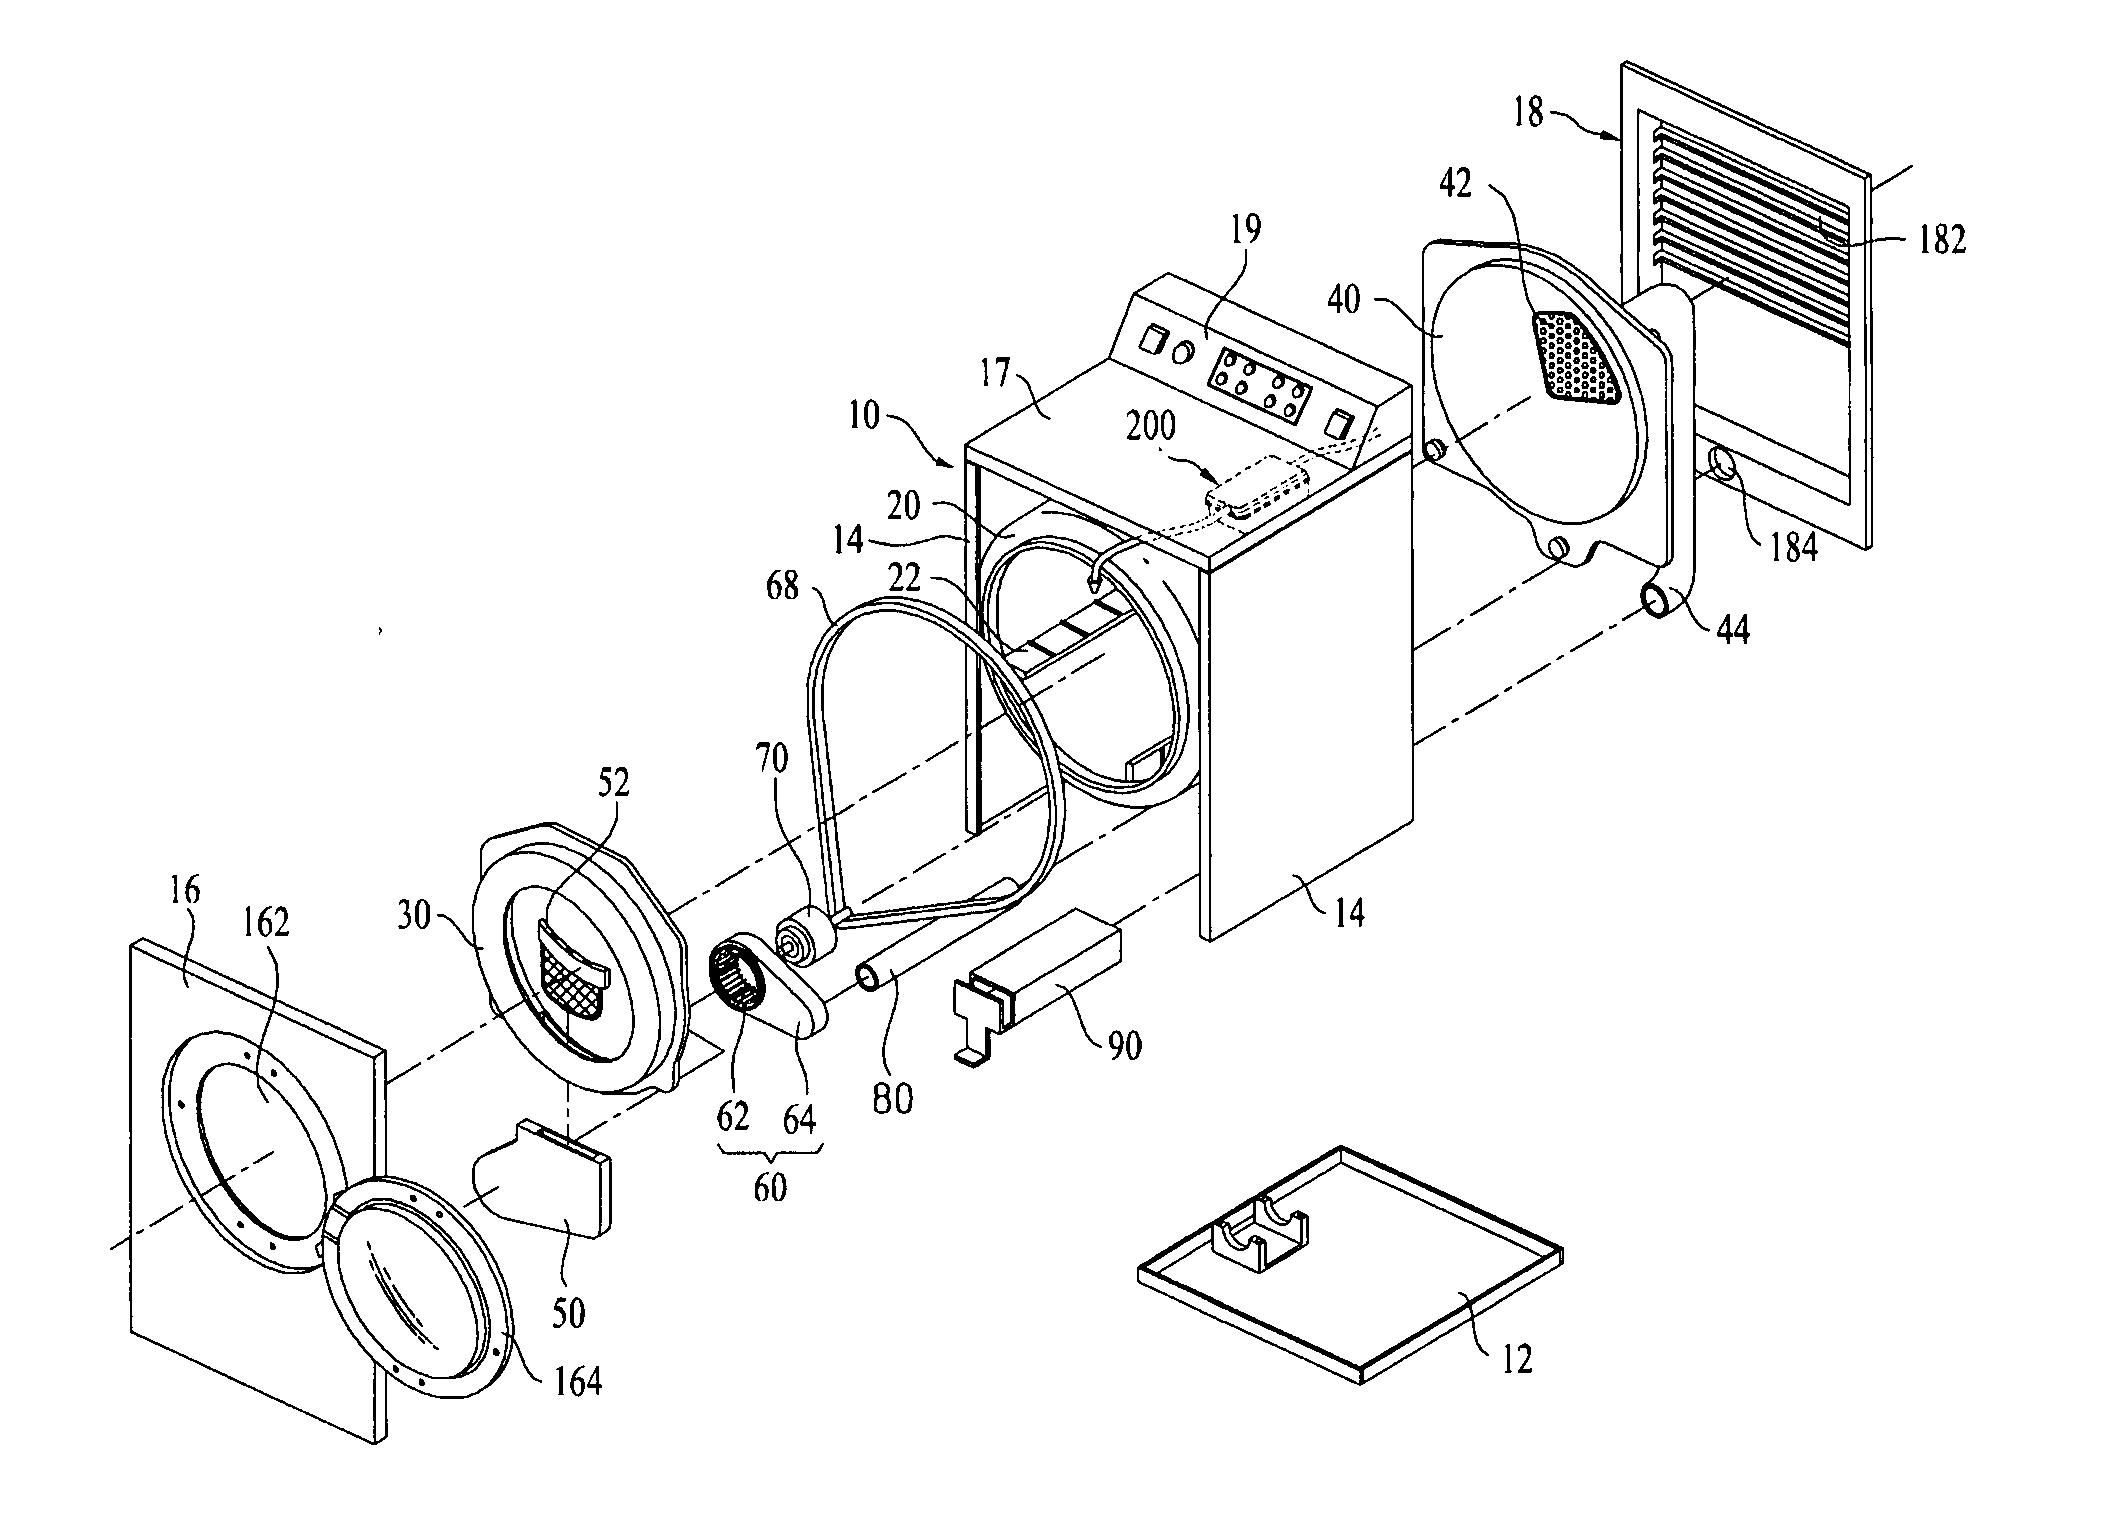 Method for controlling laundry machine